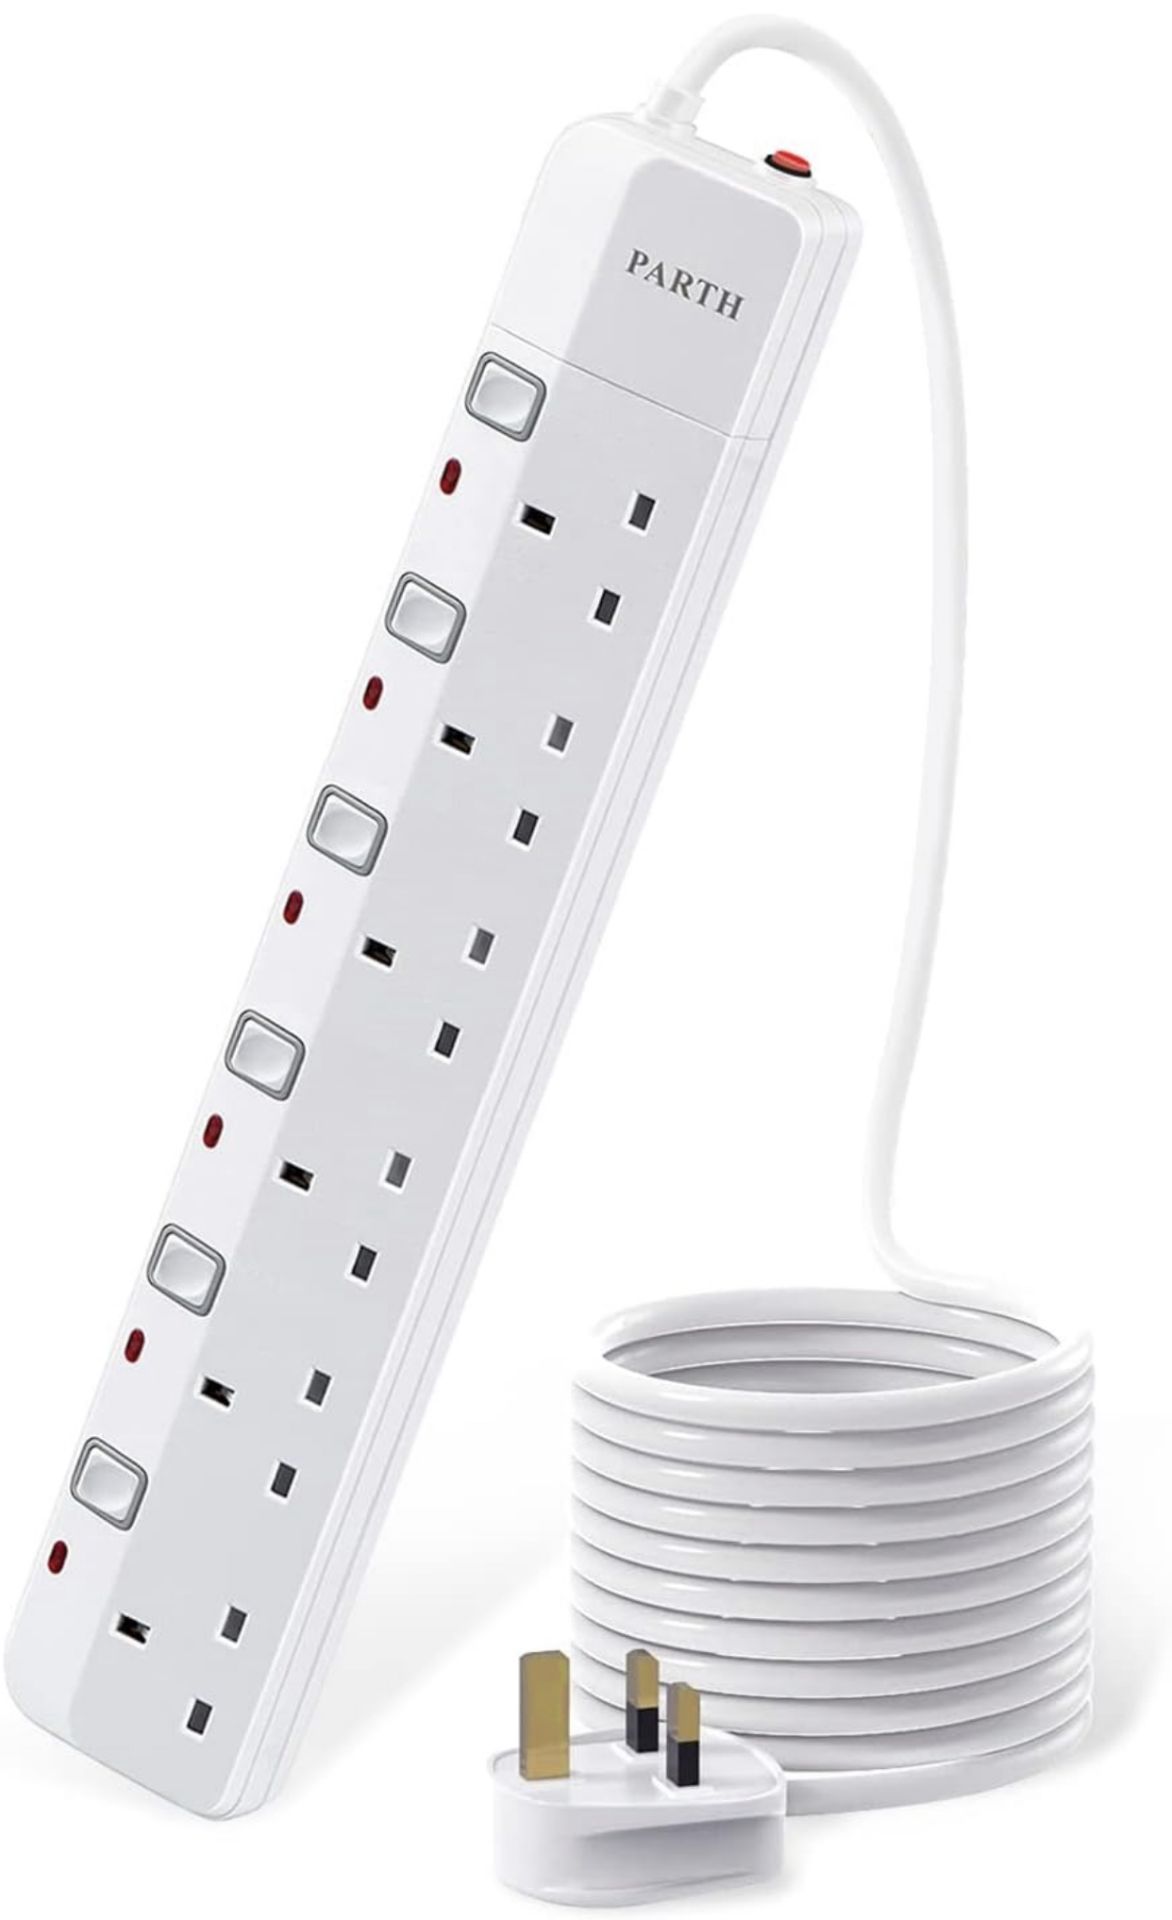 RRP £22.99 Parth Surge Protected Extension Lead 3m Long Cord 6 Way Multi-Plug with Idividual